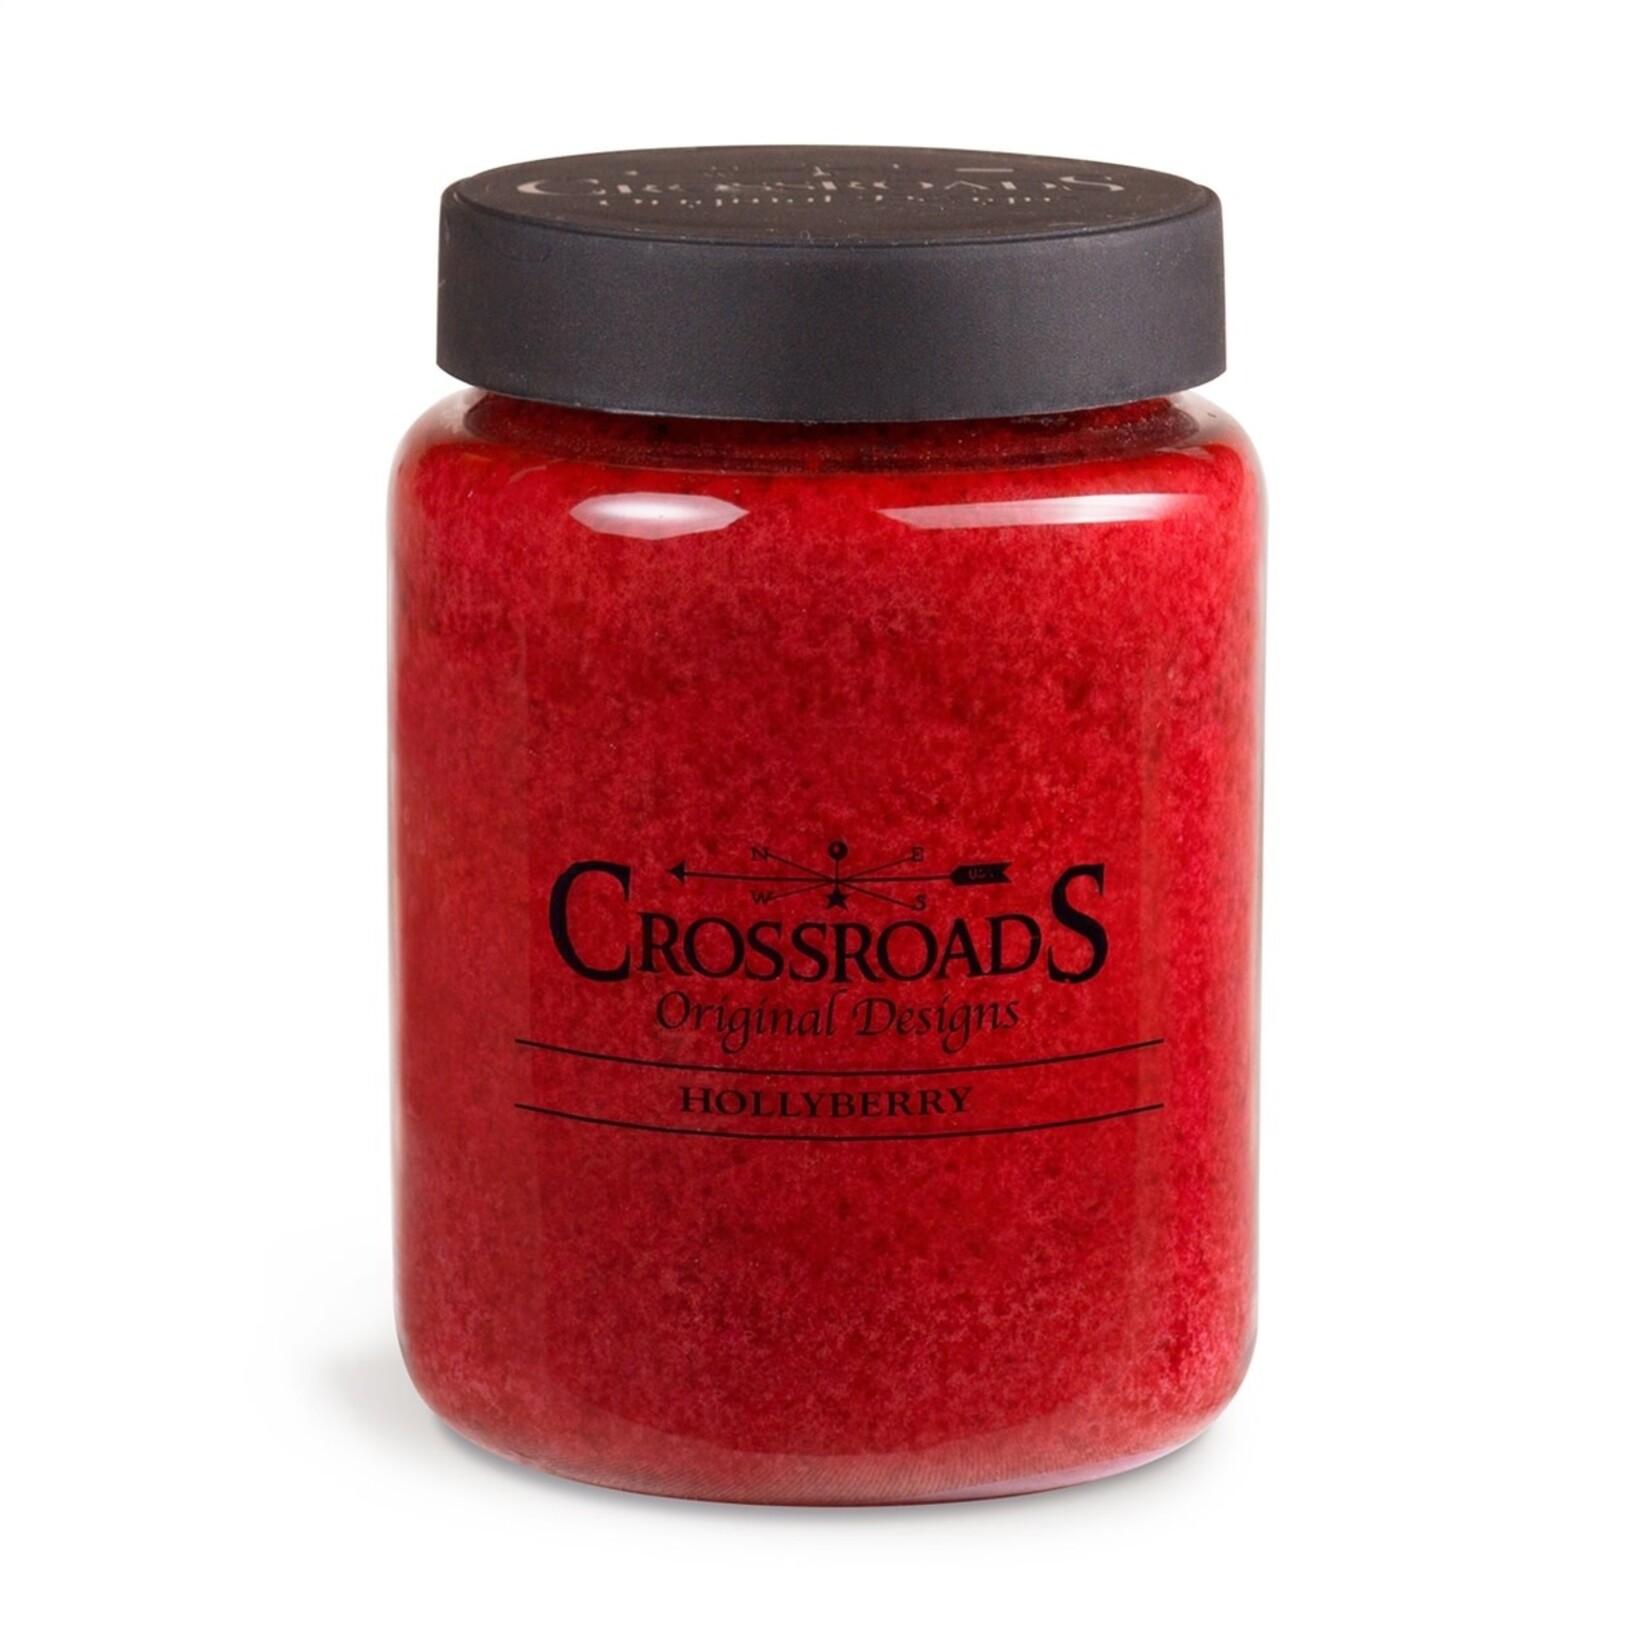 Holly Berry Crossroad Candle 26oz